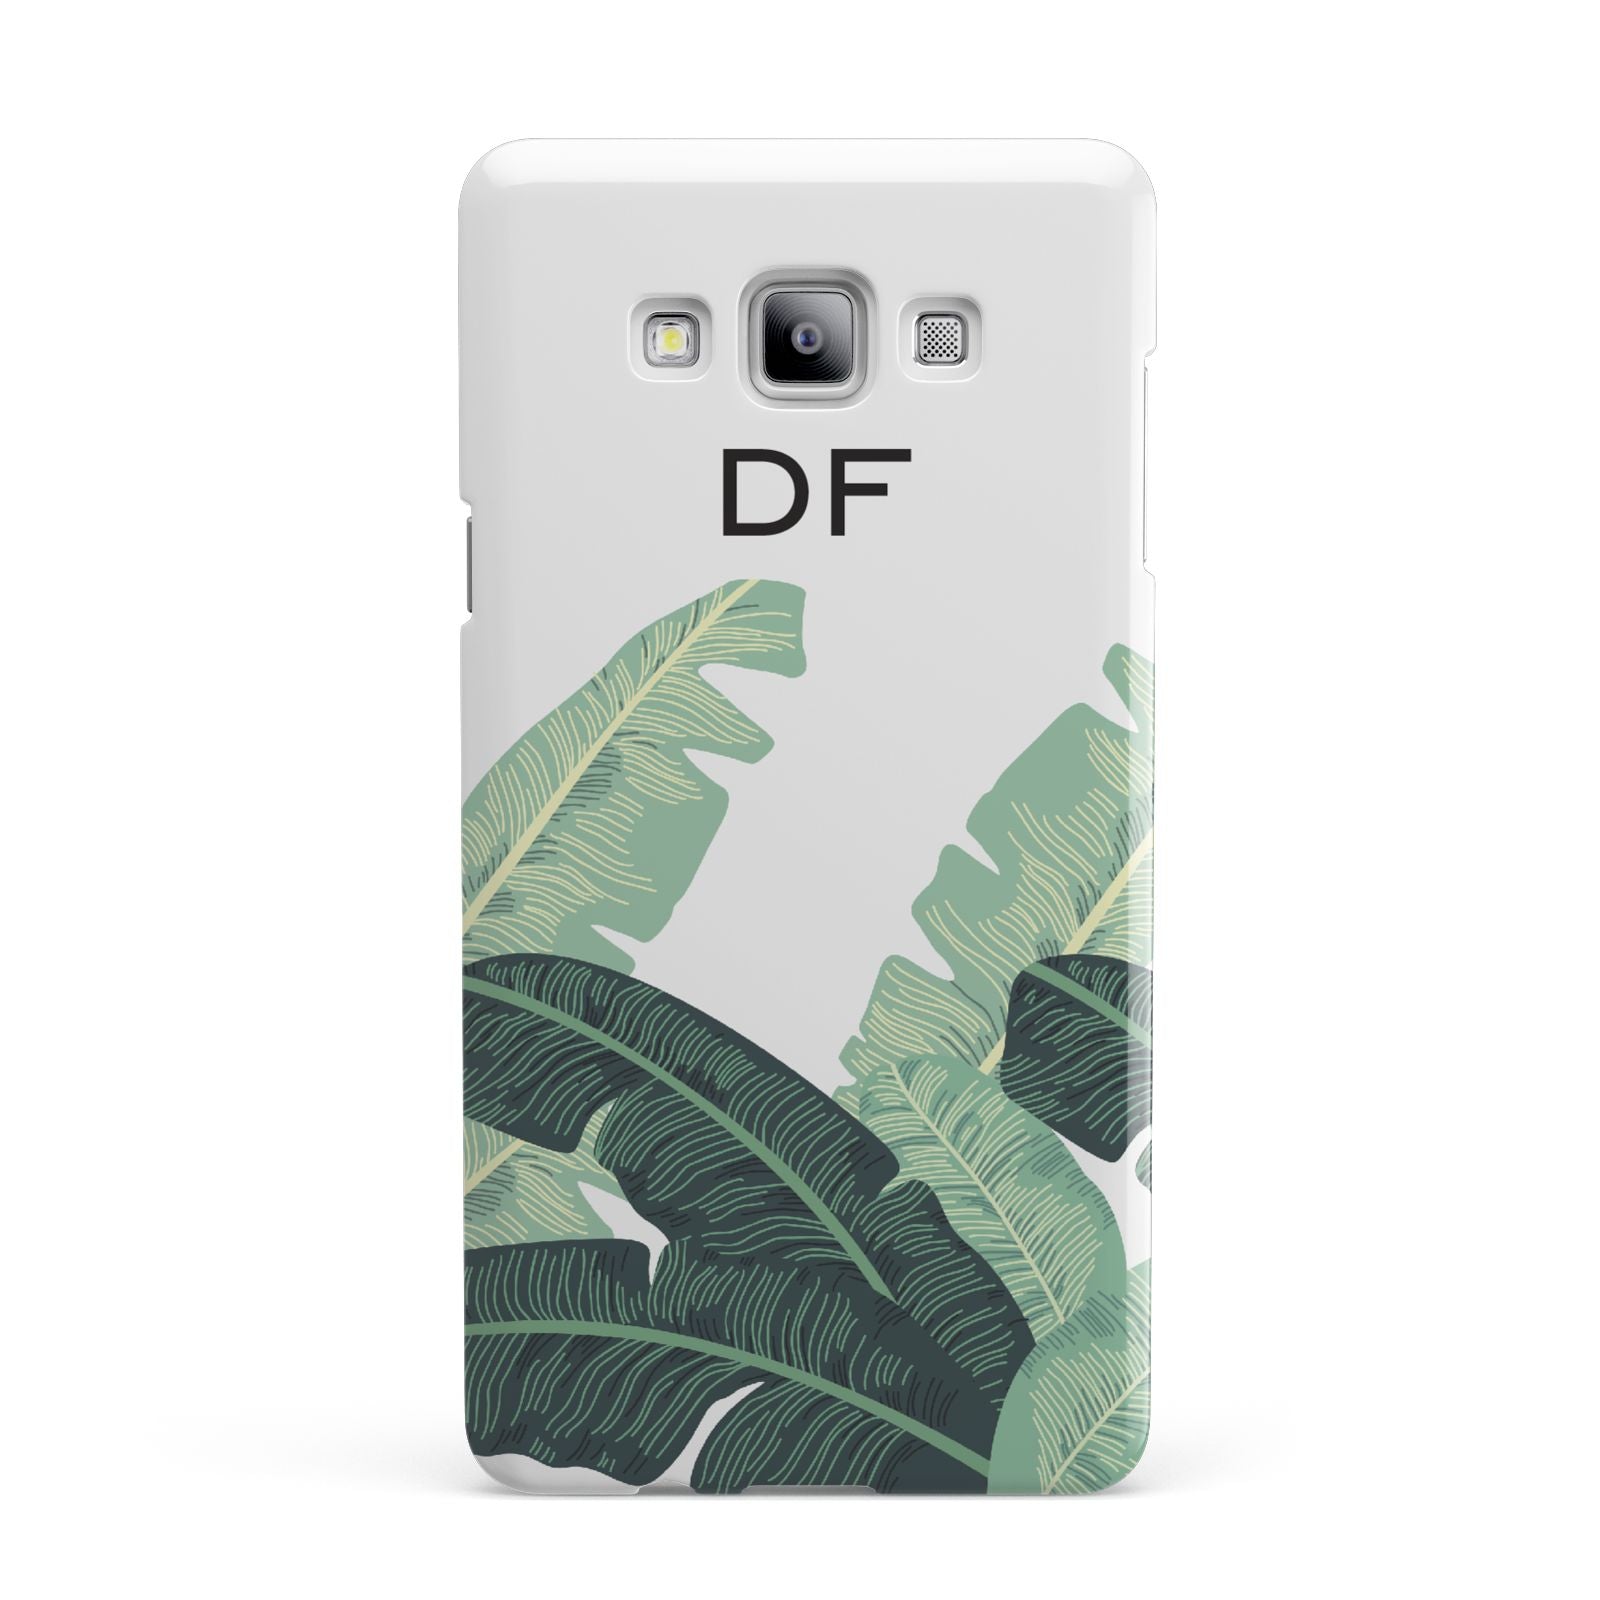 Personalised White Banana Leaf Samsung Galaxy A7 2015 Case